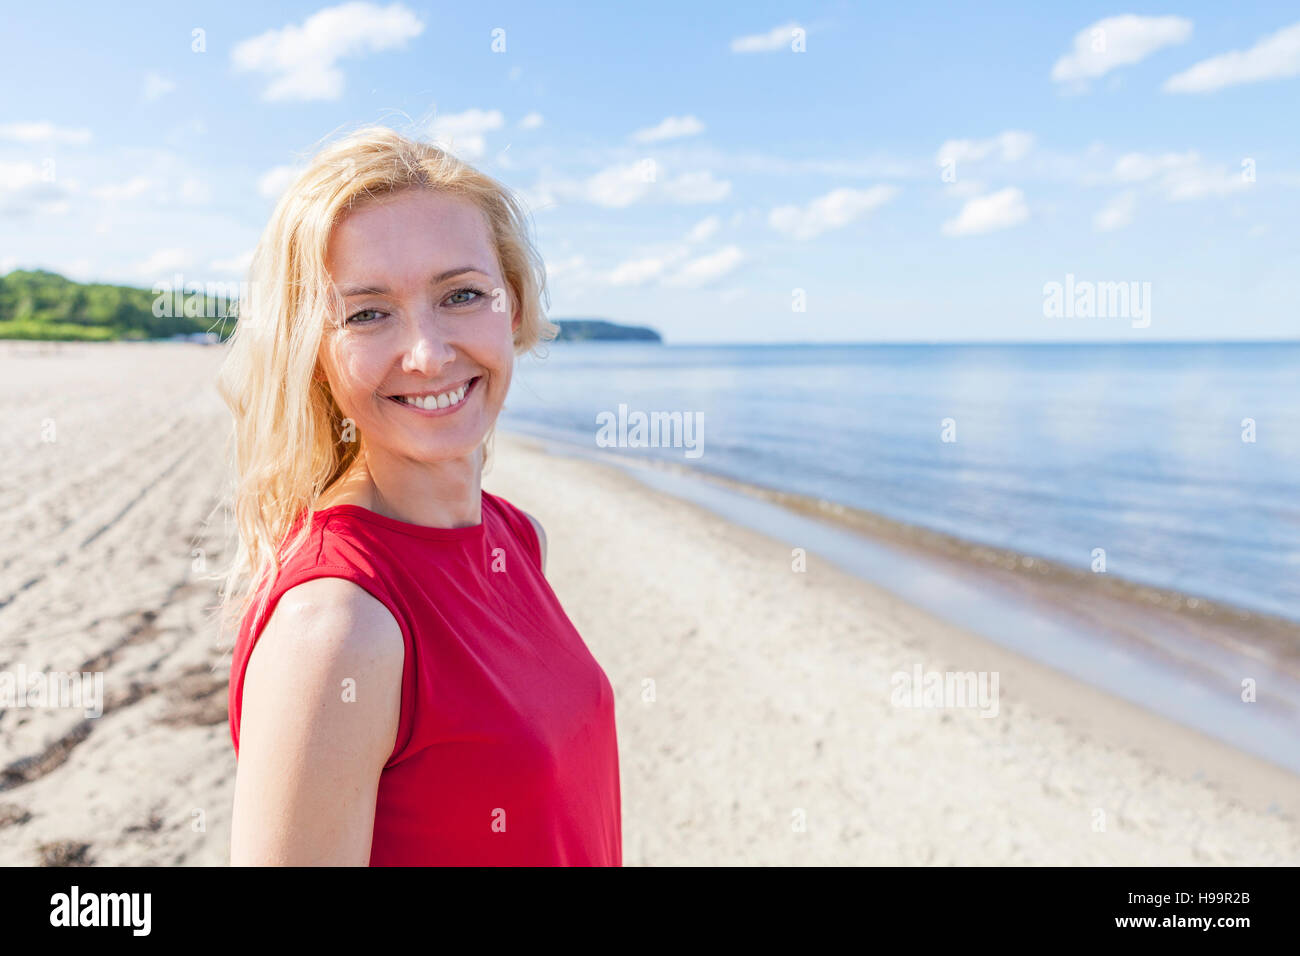 Portrait of woman with blond hair on beach Stock Photo